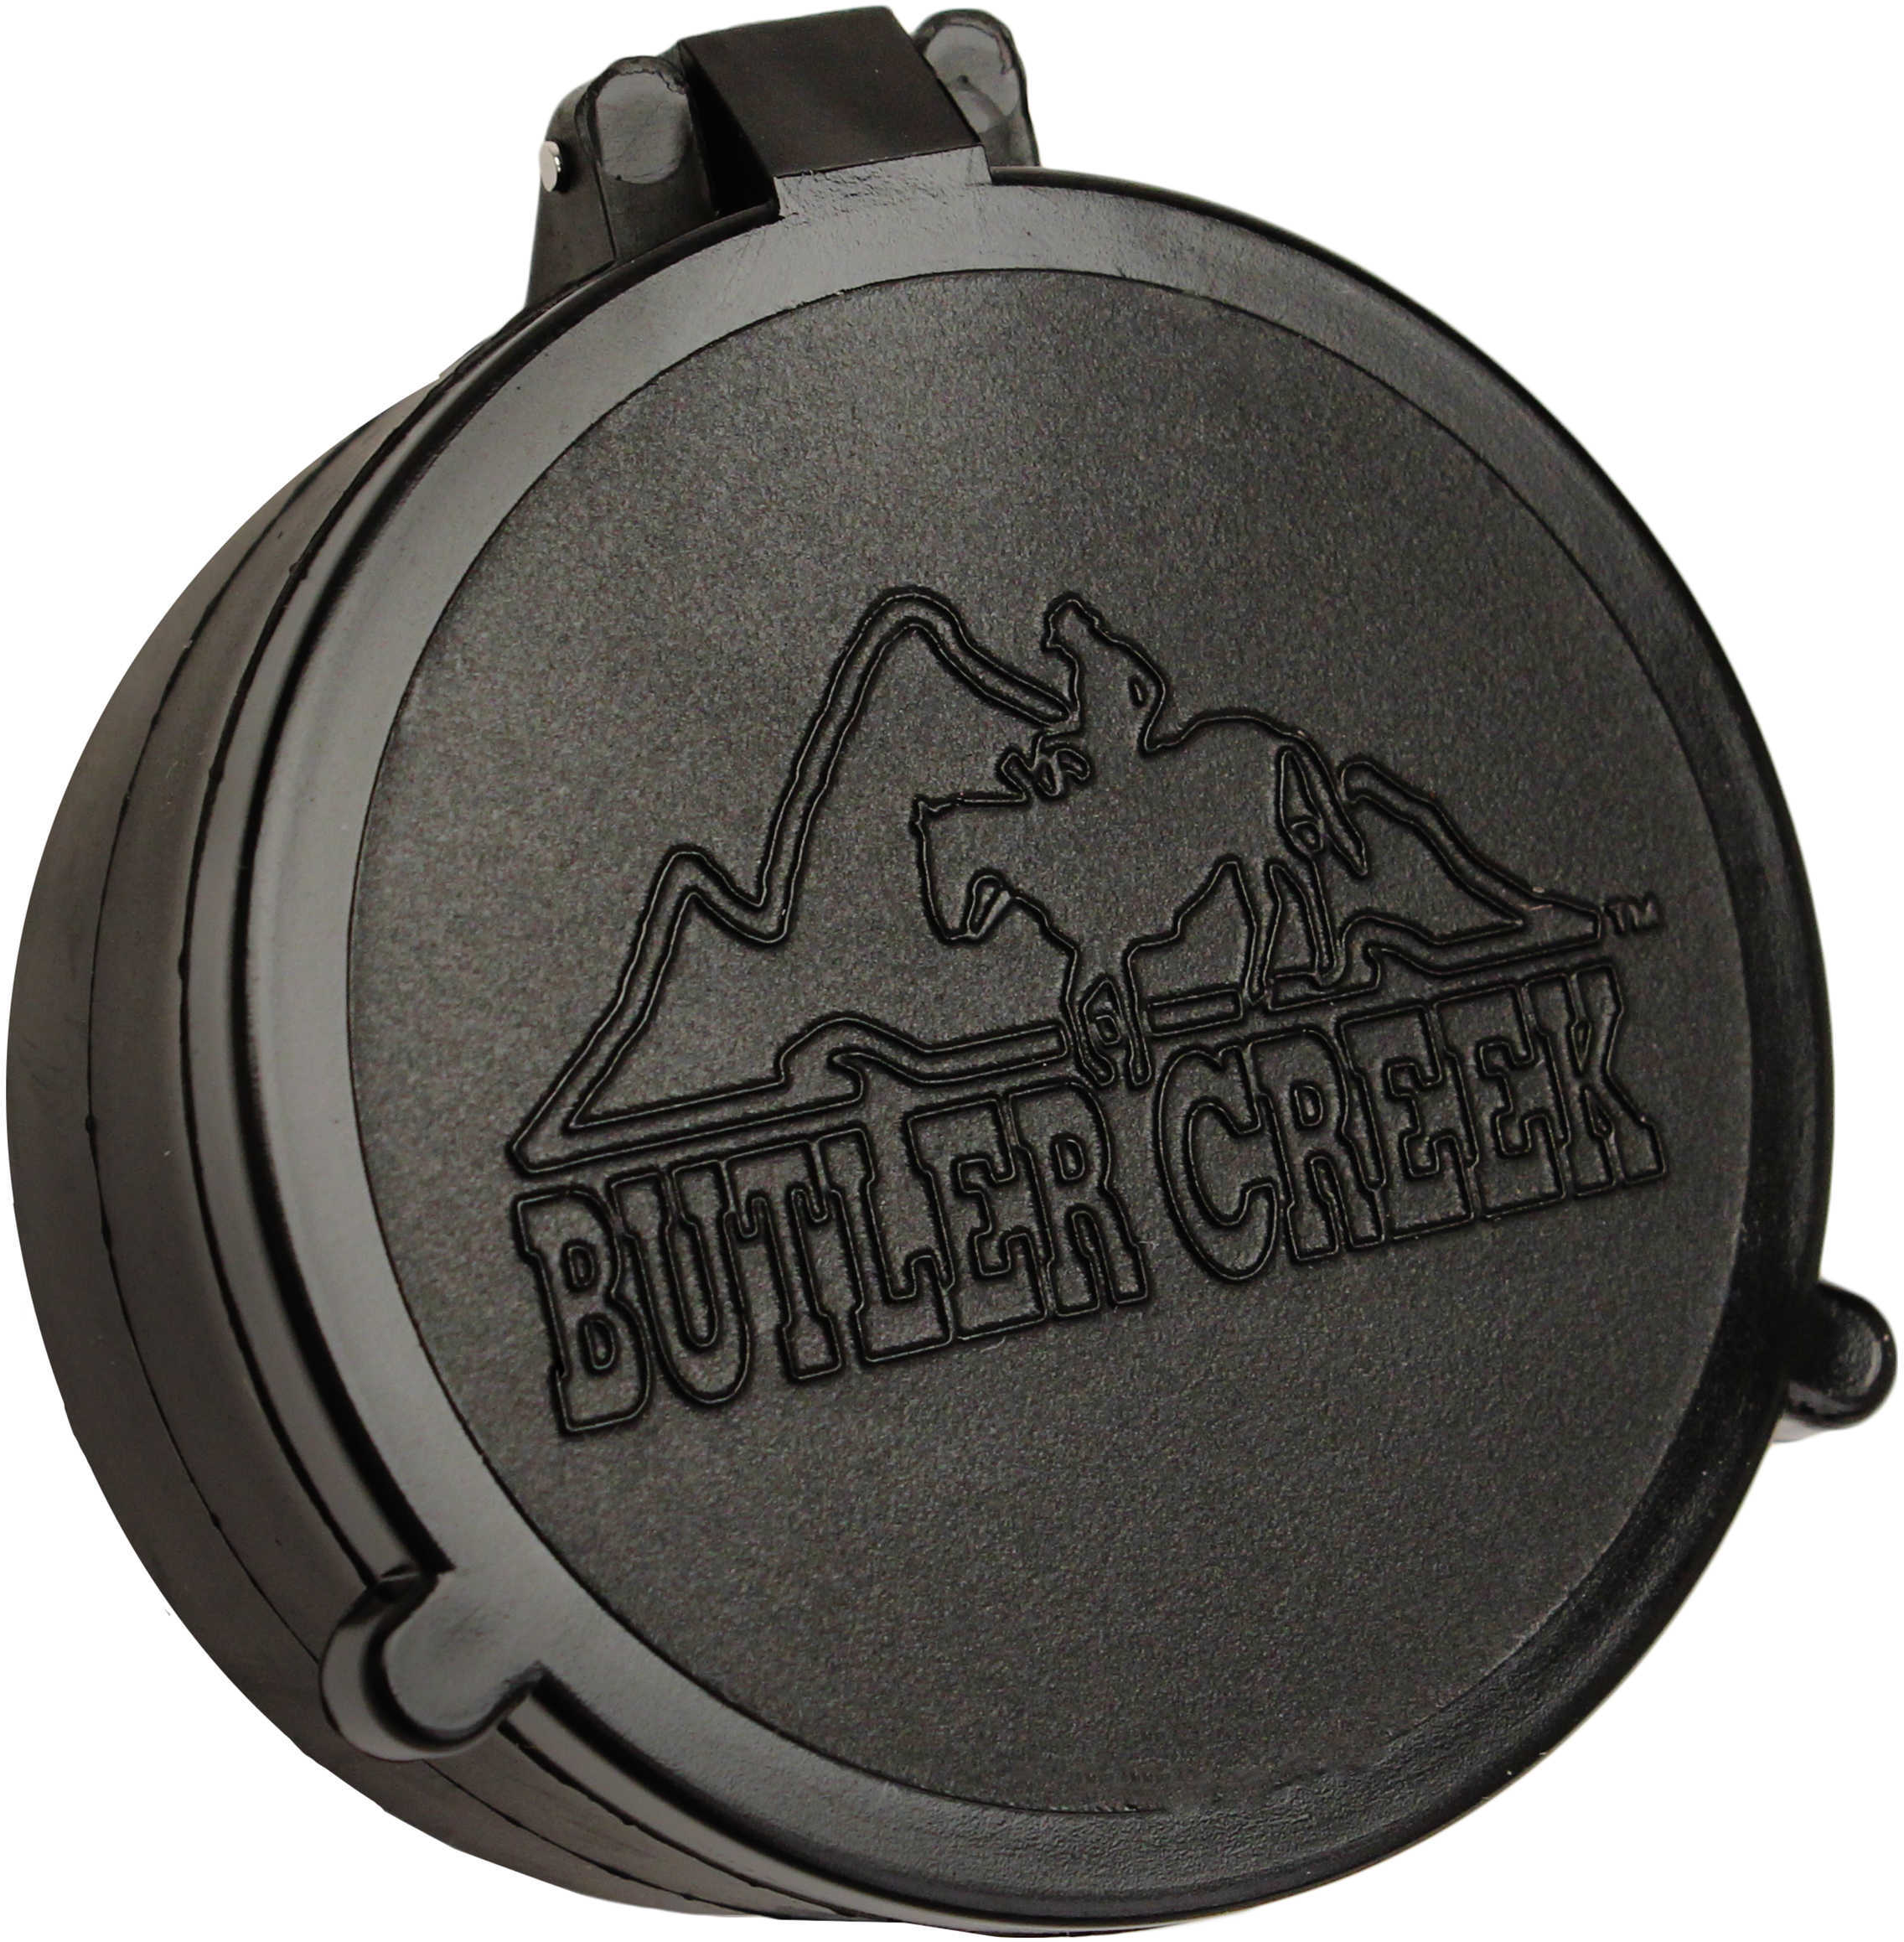 Butler Creek Flip-Open Scope Cover - 45 Objective 2.410" Diameter Quiet Opening lids at The Touch Of Your thum